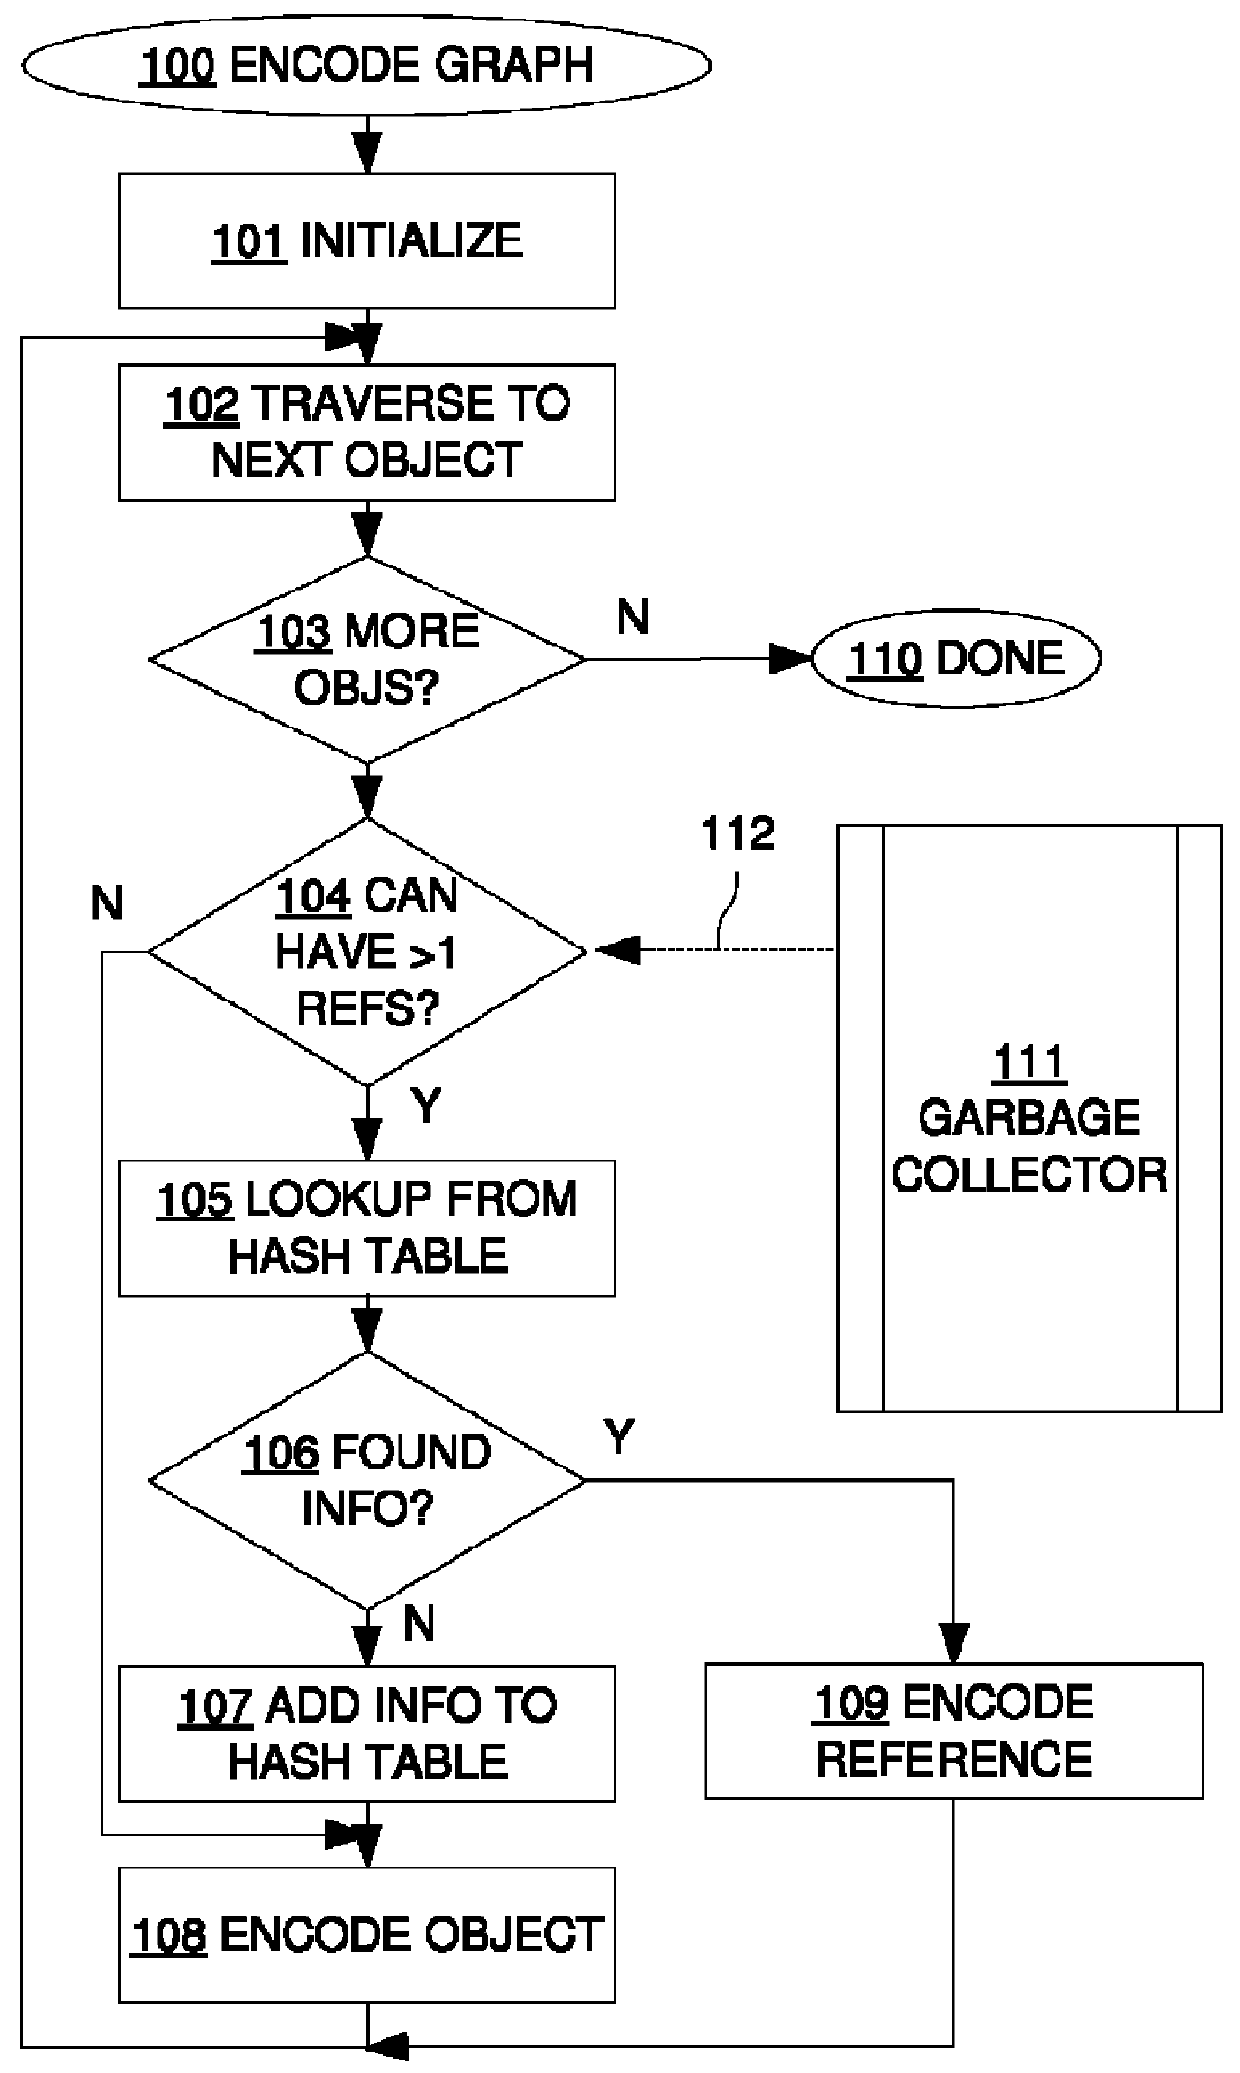 Utilizing information from garbage collector in serialization of large cyclic data structures